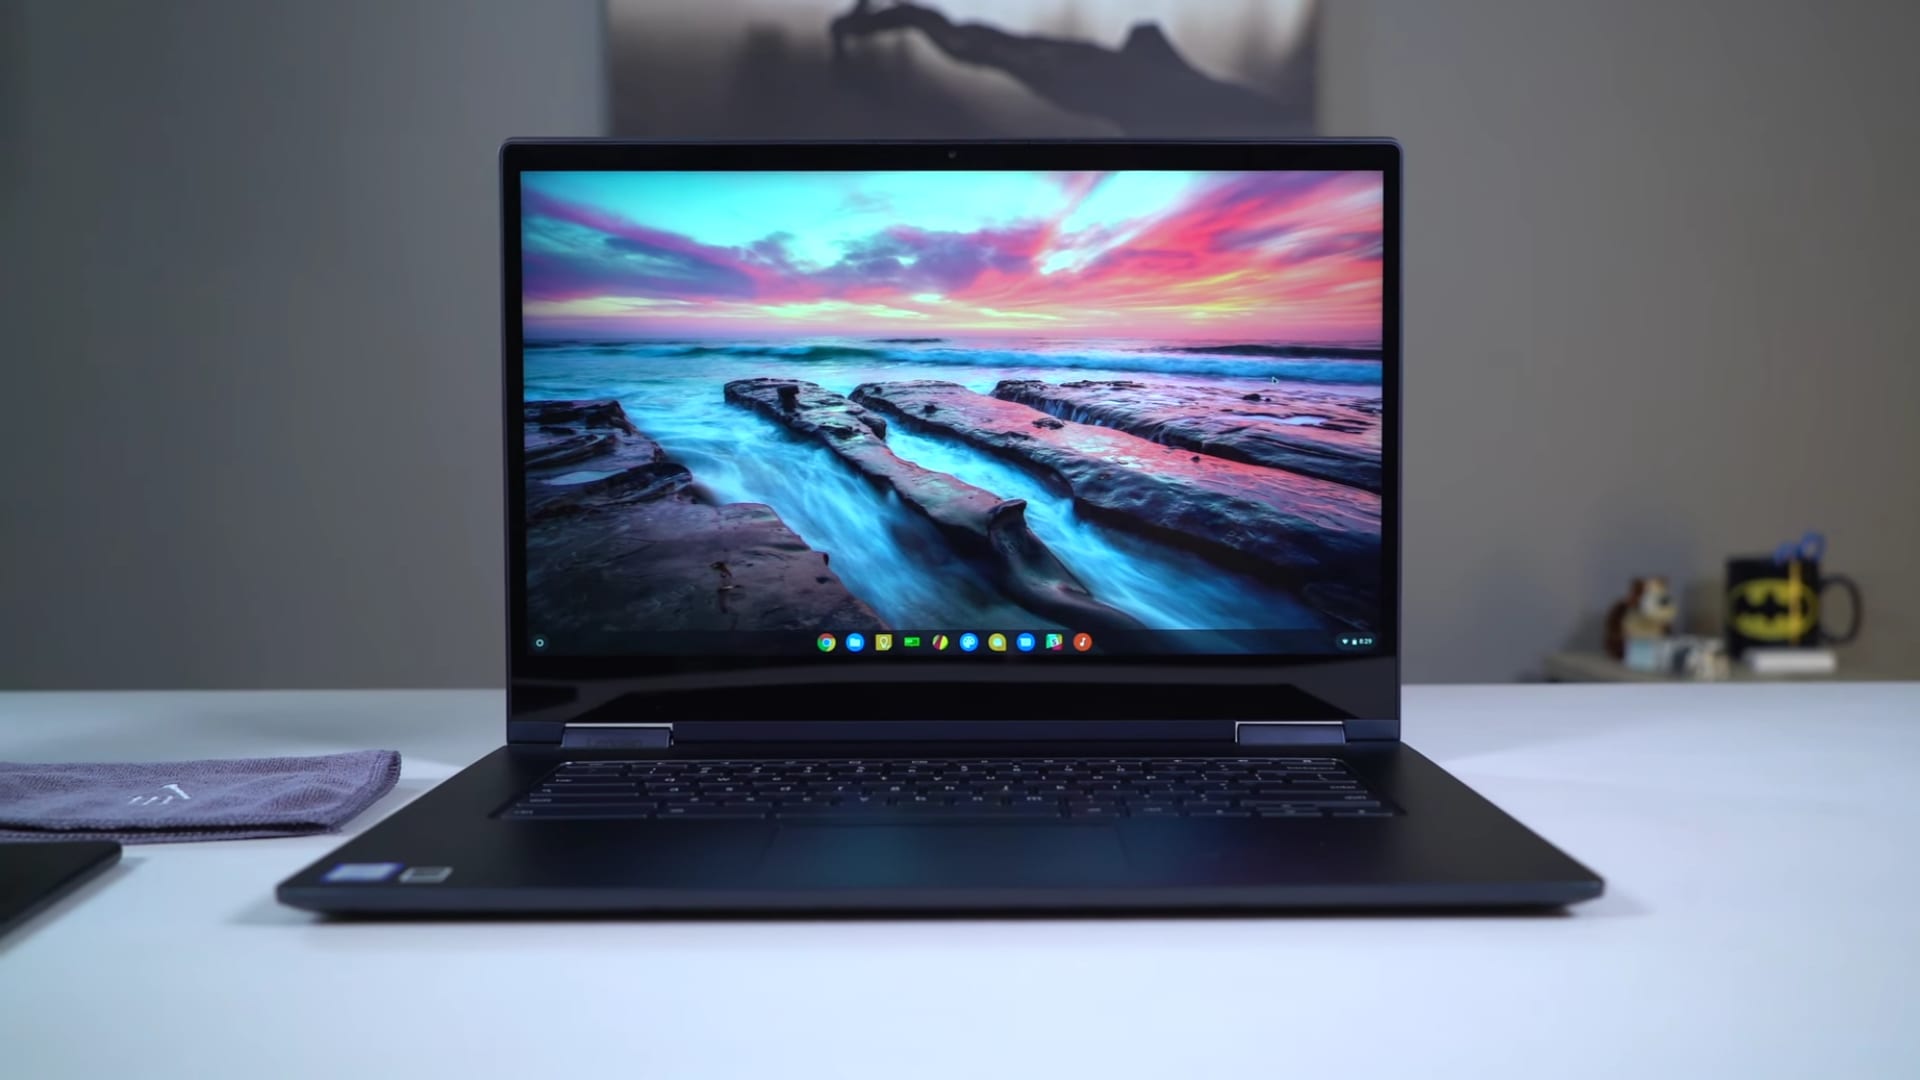 Lenovo’s 4k Chromebook Is On Sale And More Affordable - Chromebook C630 - HD Wallpaper 